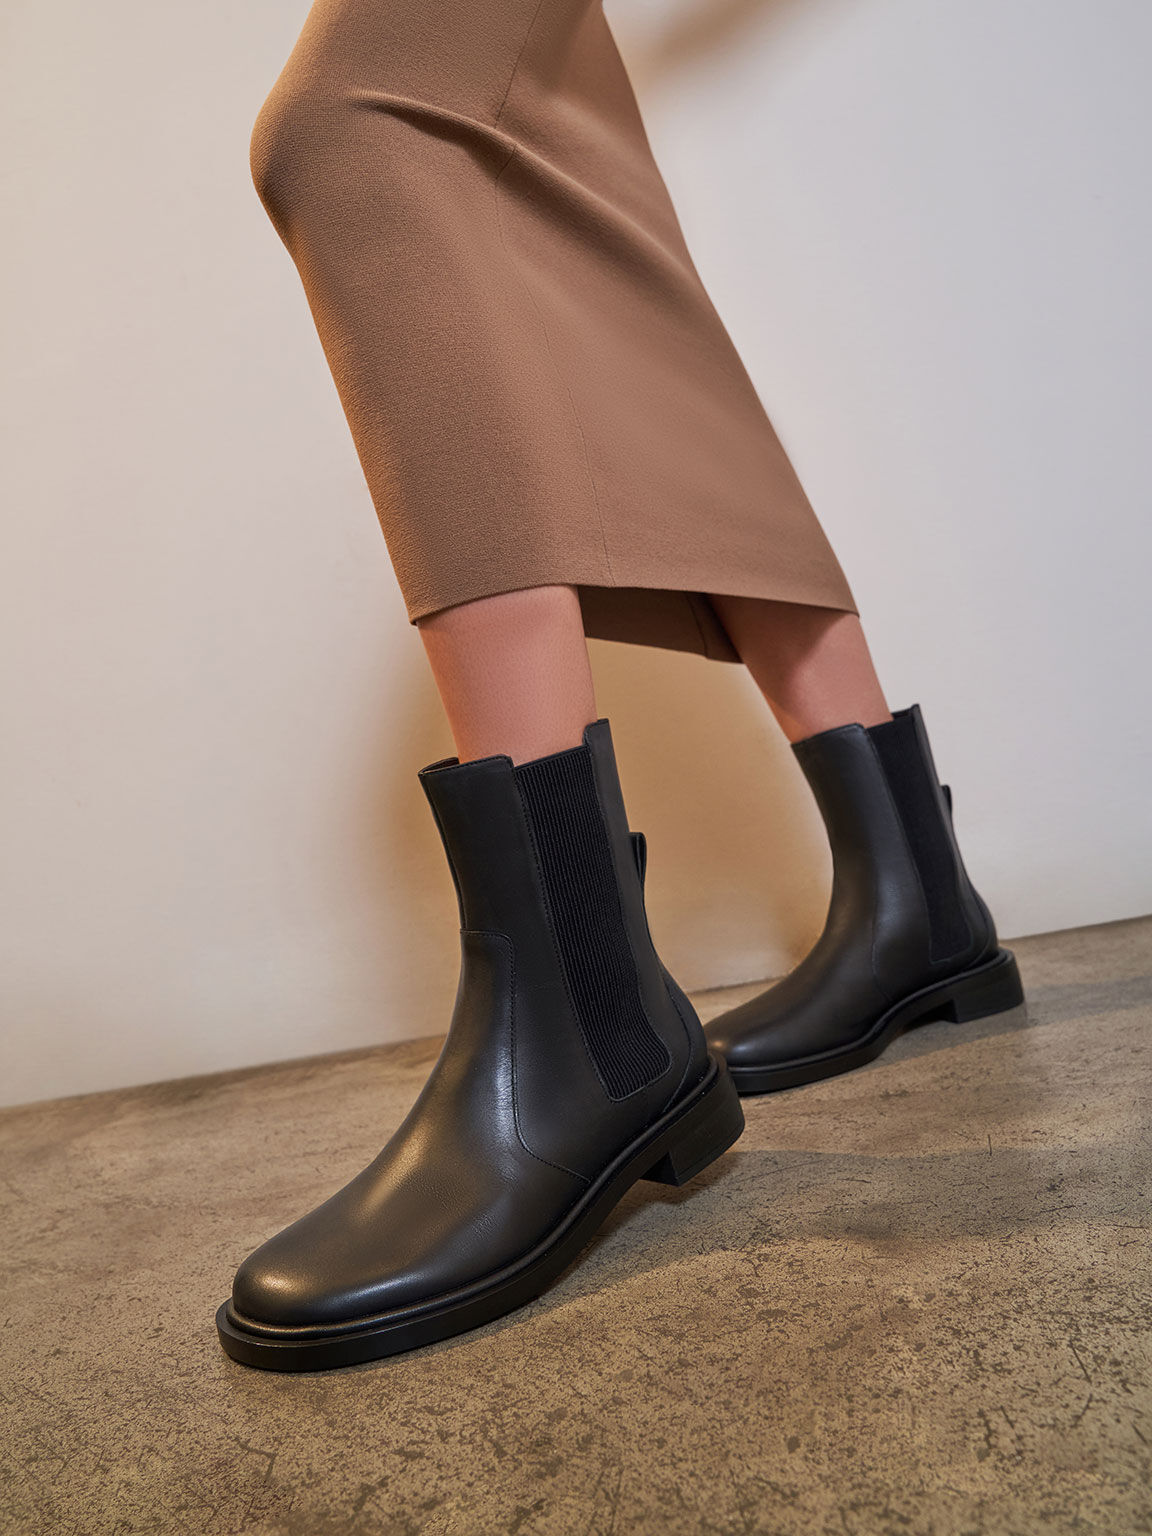 Leather Round-Toe Chelsea Boots, Black, hi-res